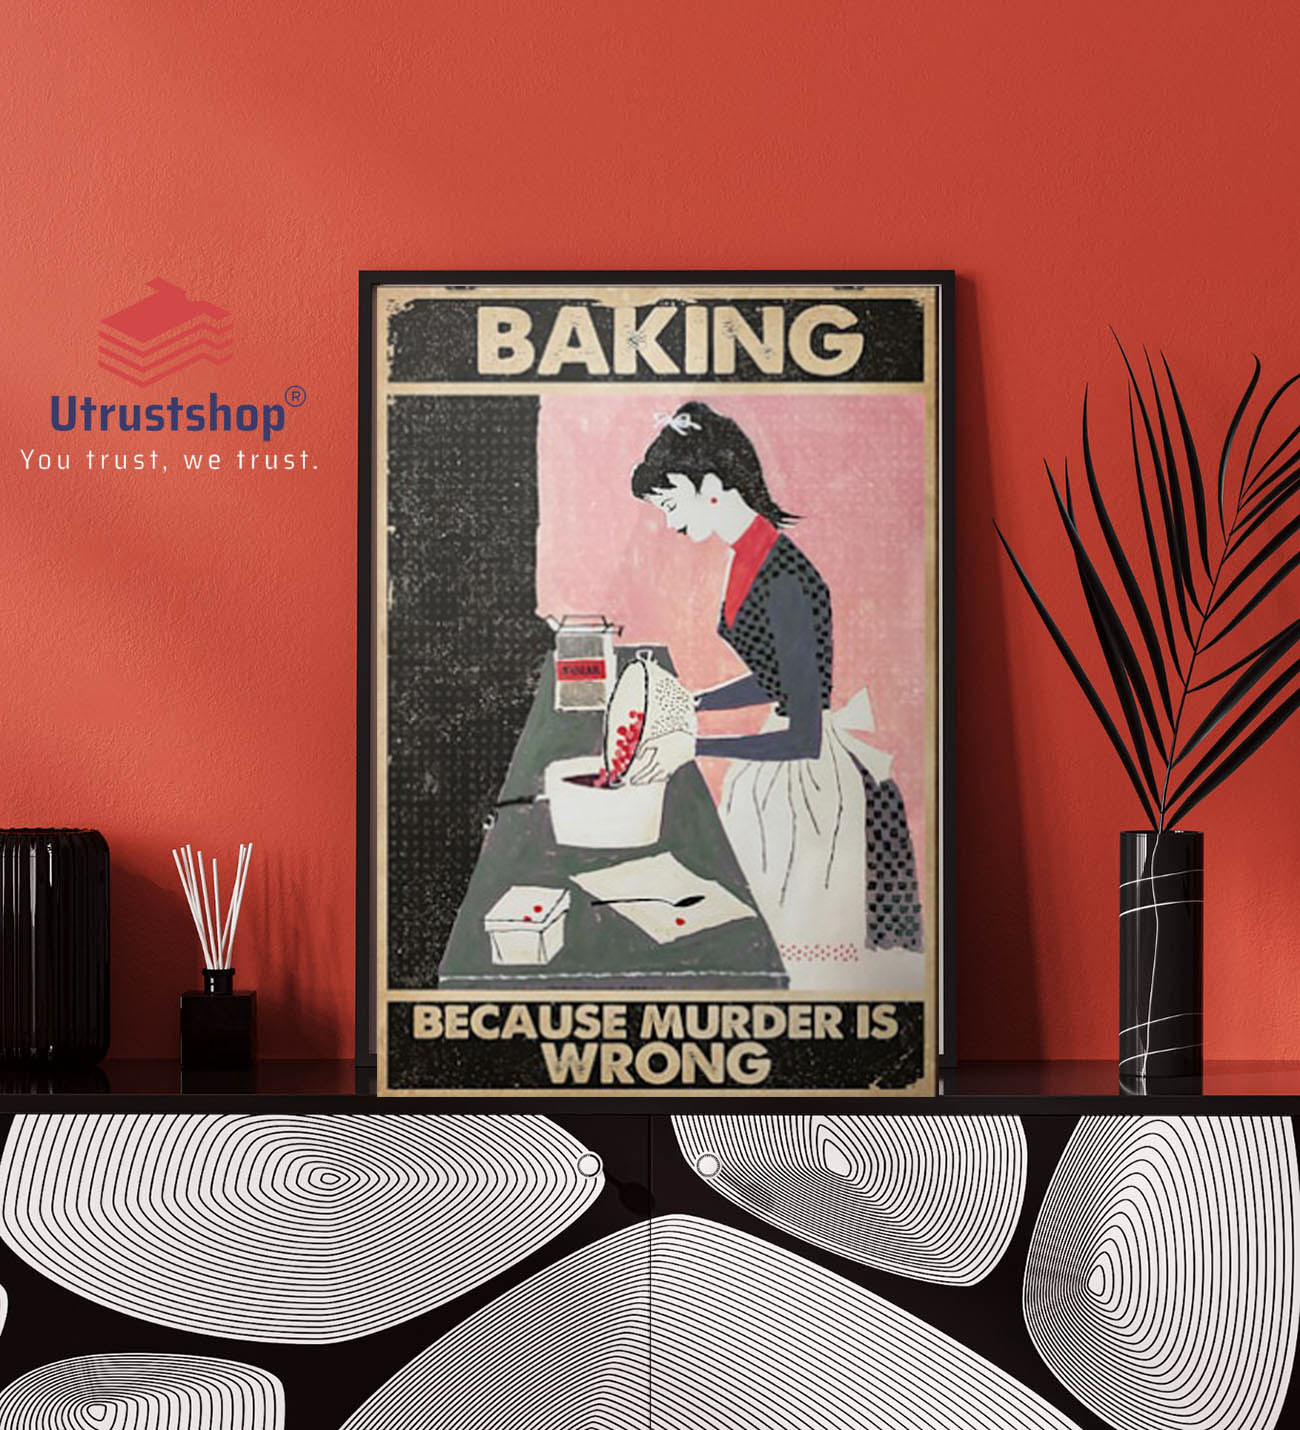 Baking because murder is wrong poster